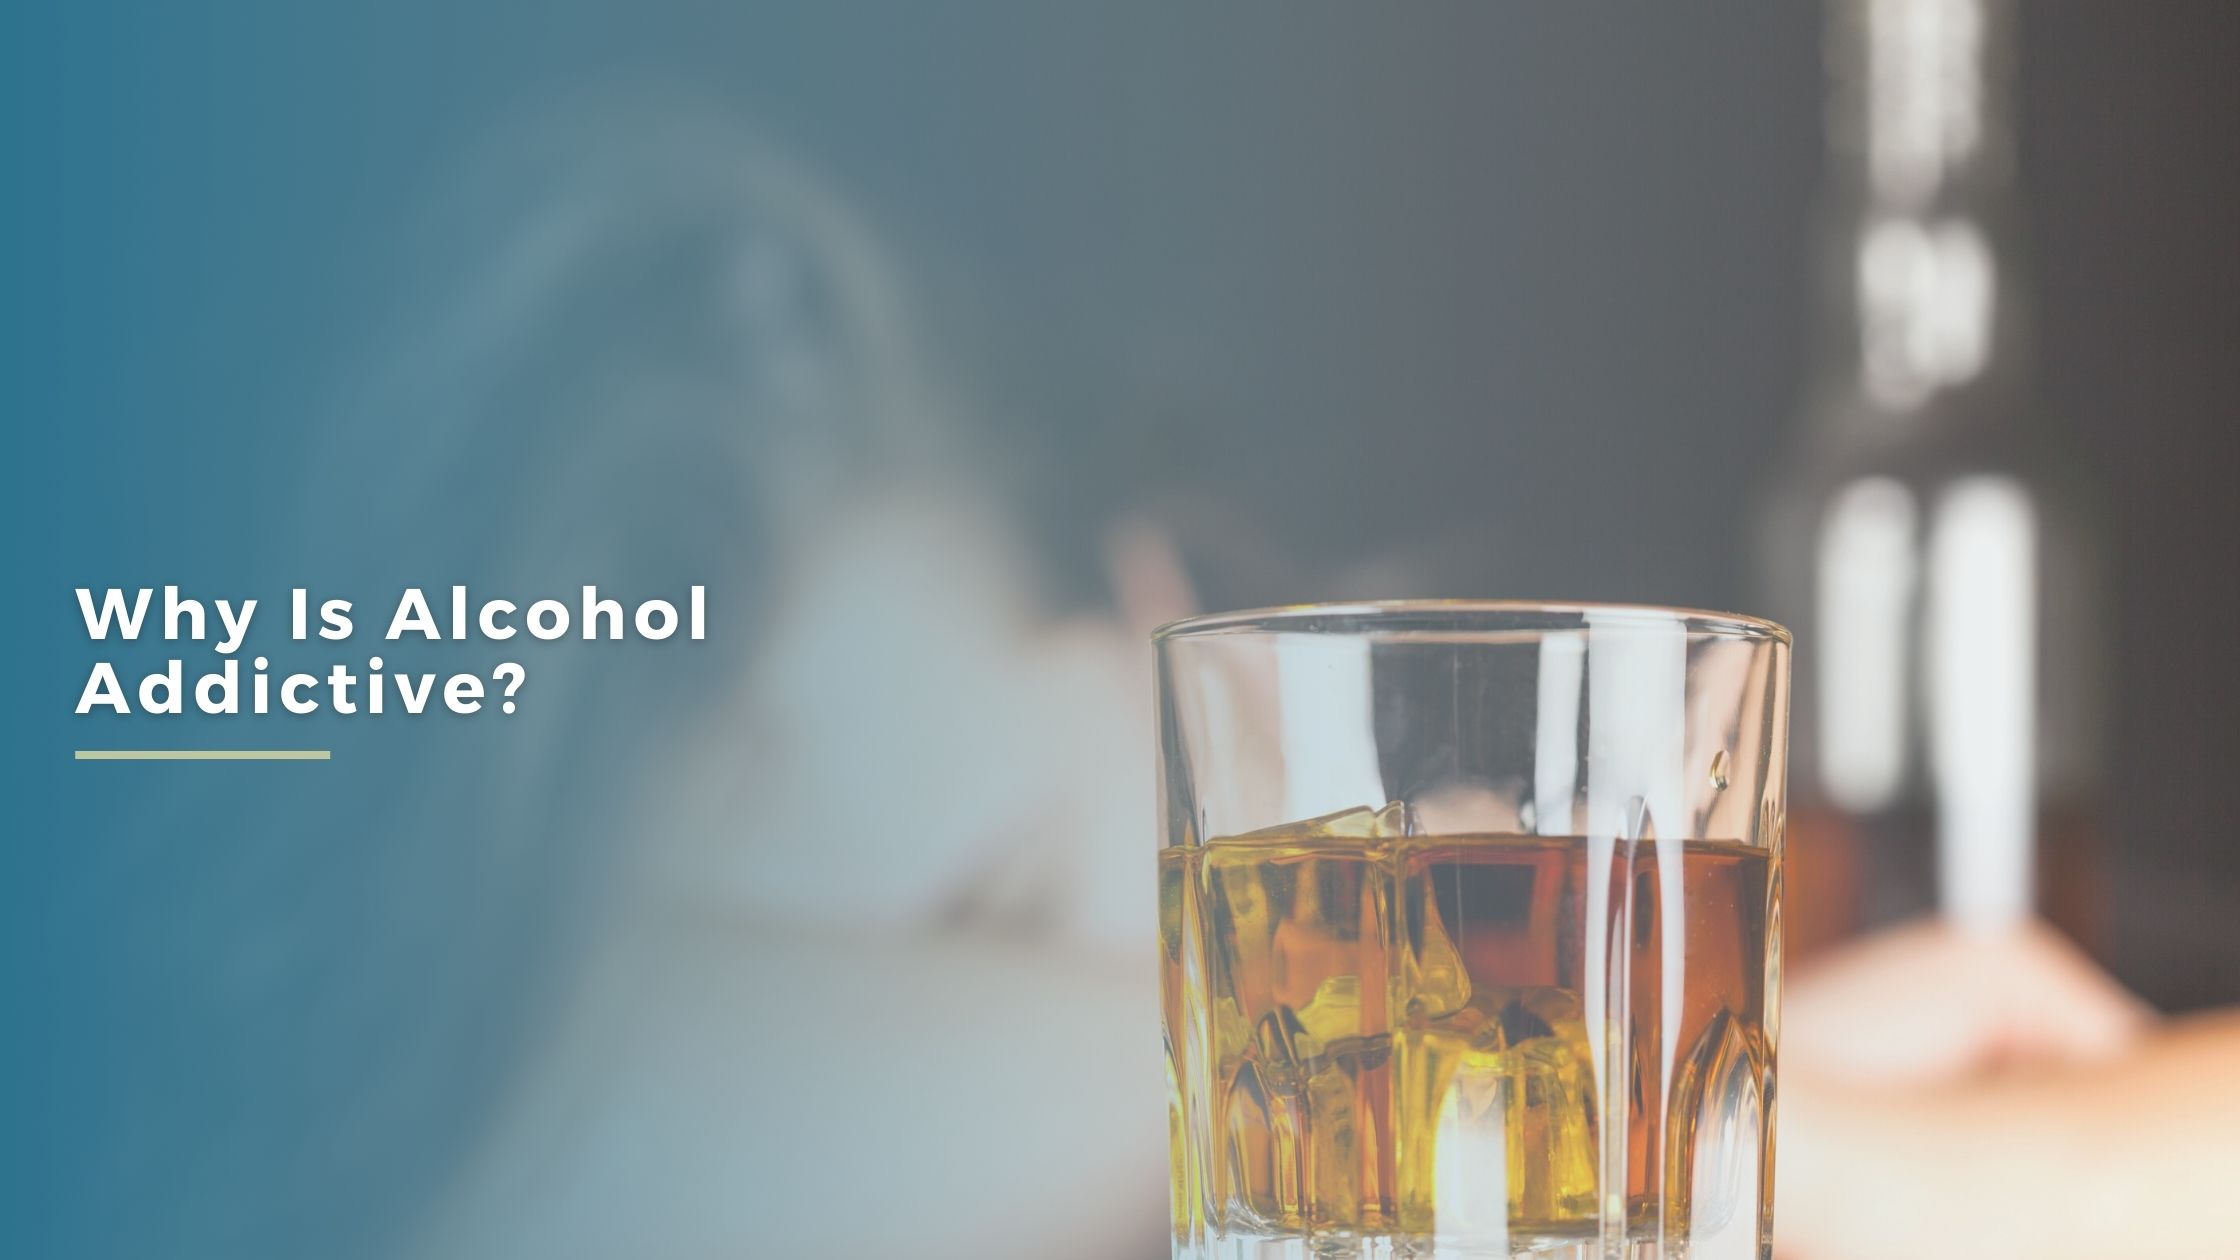 Why Is Alcohol Addictive?